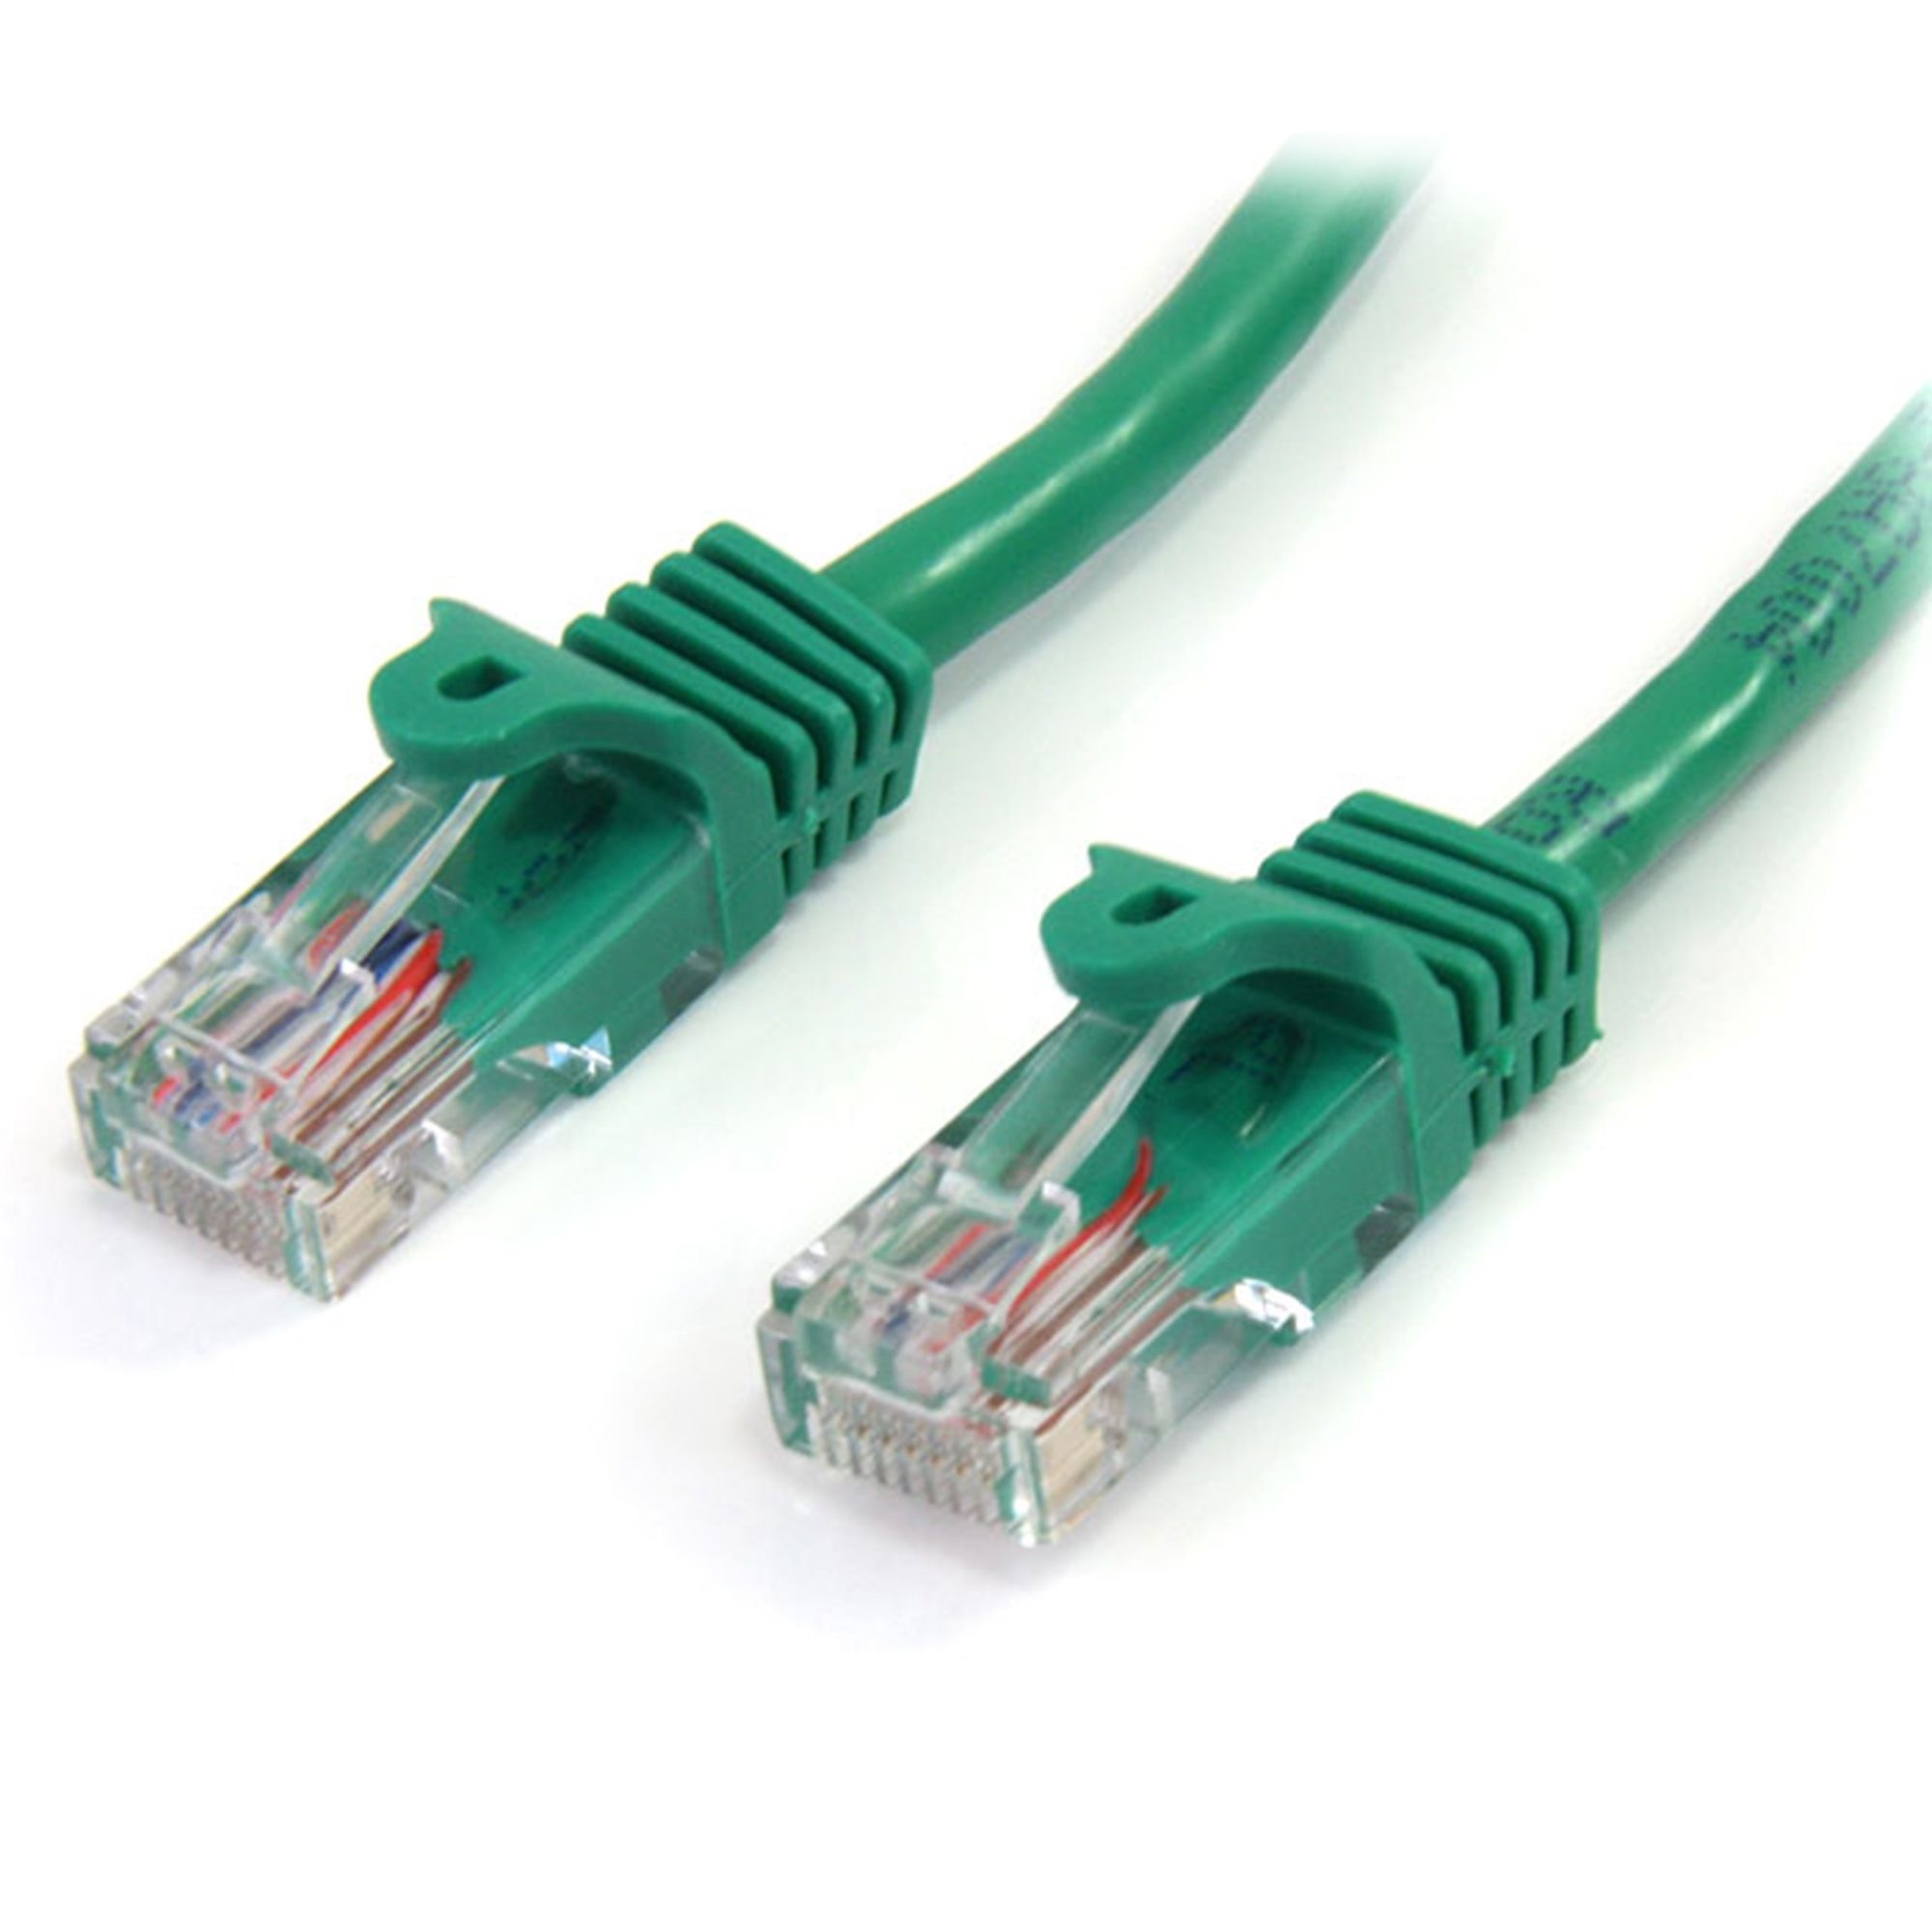 StarTech Snagless UTP Cat5e Patch Cable (Green, 2m)